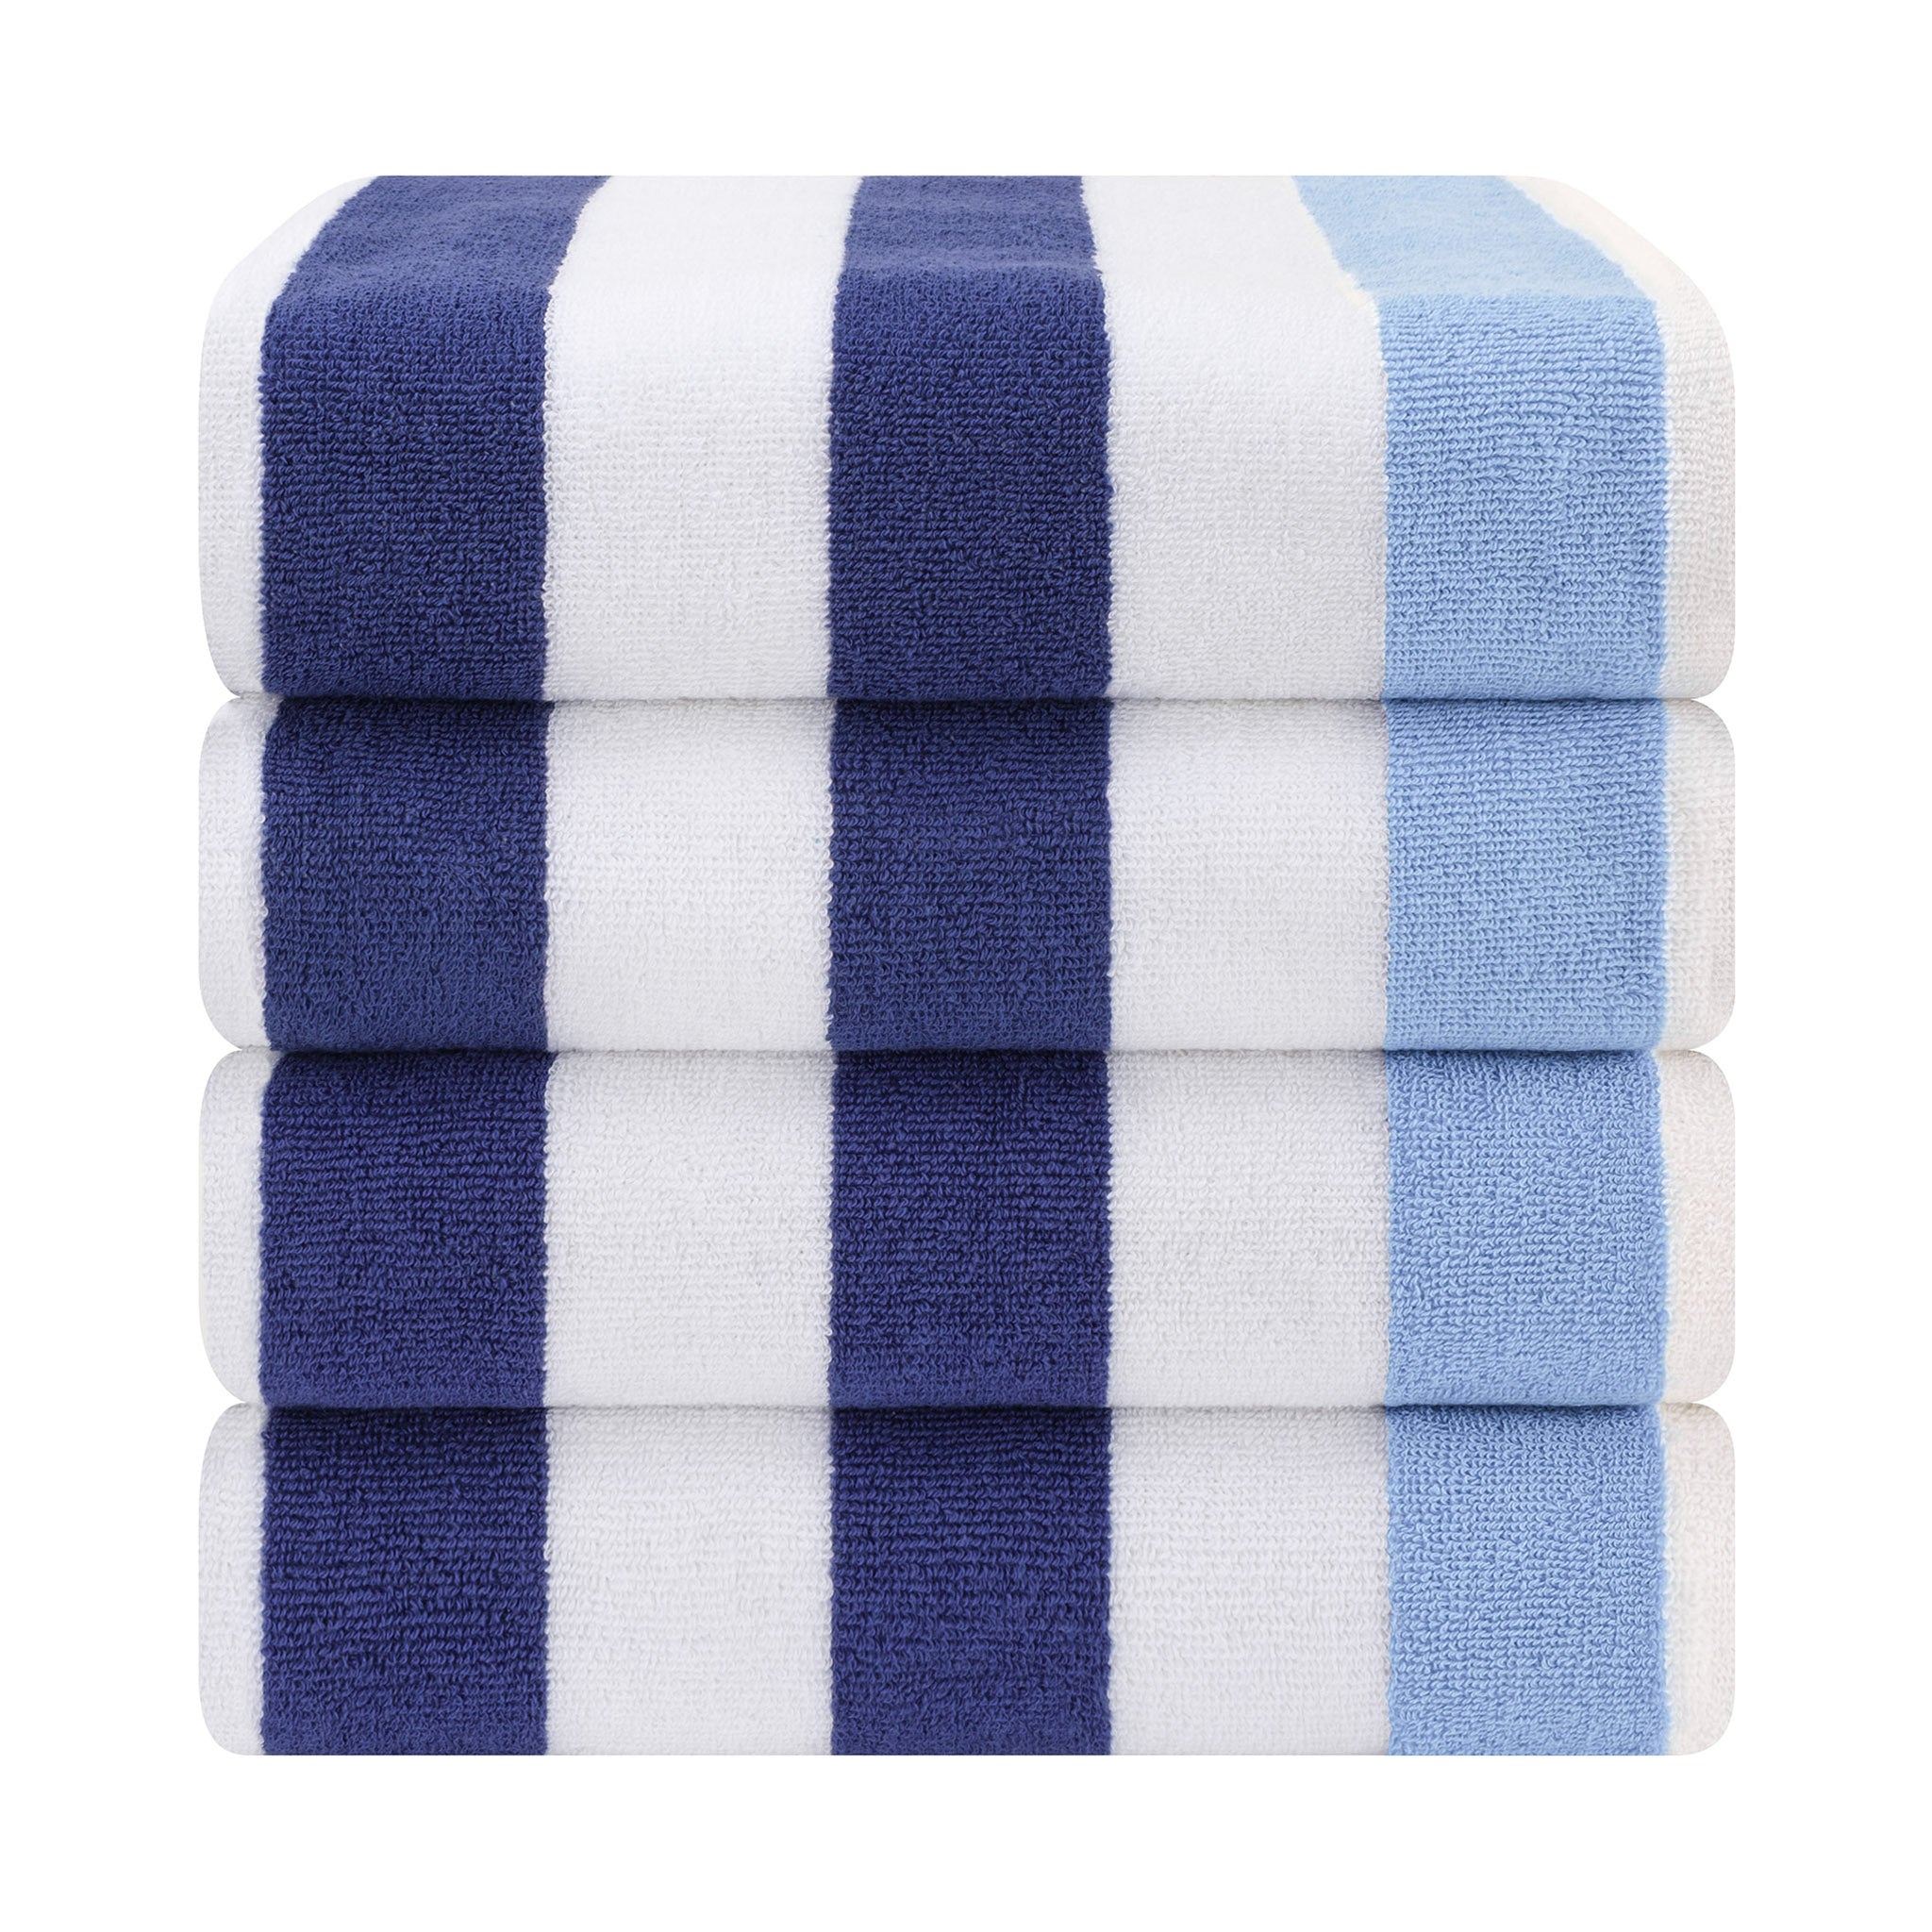 Lucky Brand 100% Cotton Extra Large Beach Towels, Pool Towels, Bath Towels  - Lightweight & Quick Dry Towels - 36 in. x 68 in (1 Pack) - Navy Blue Star